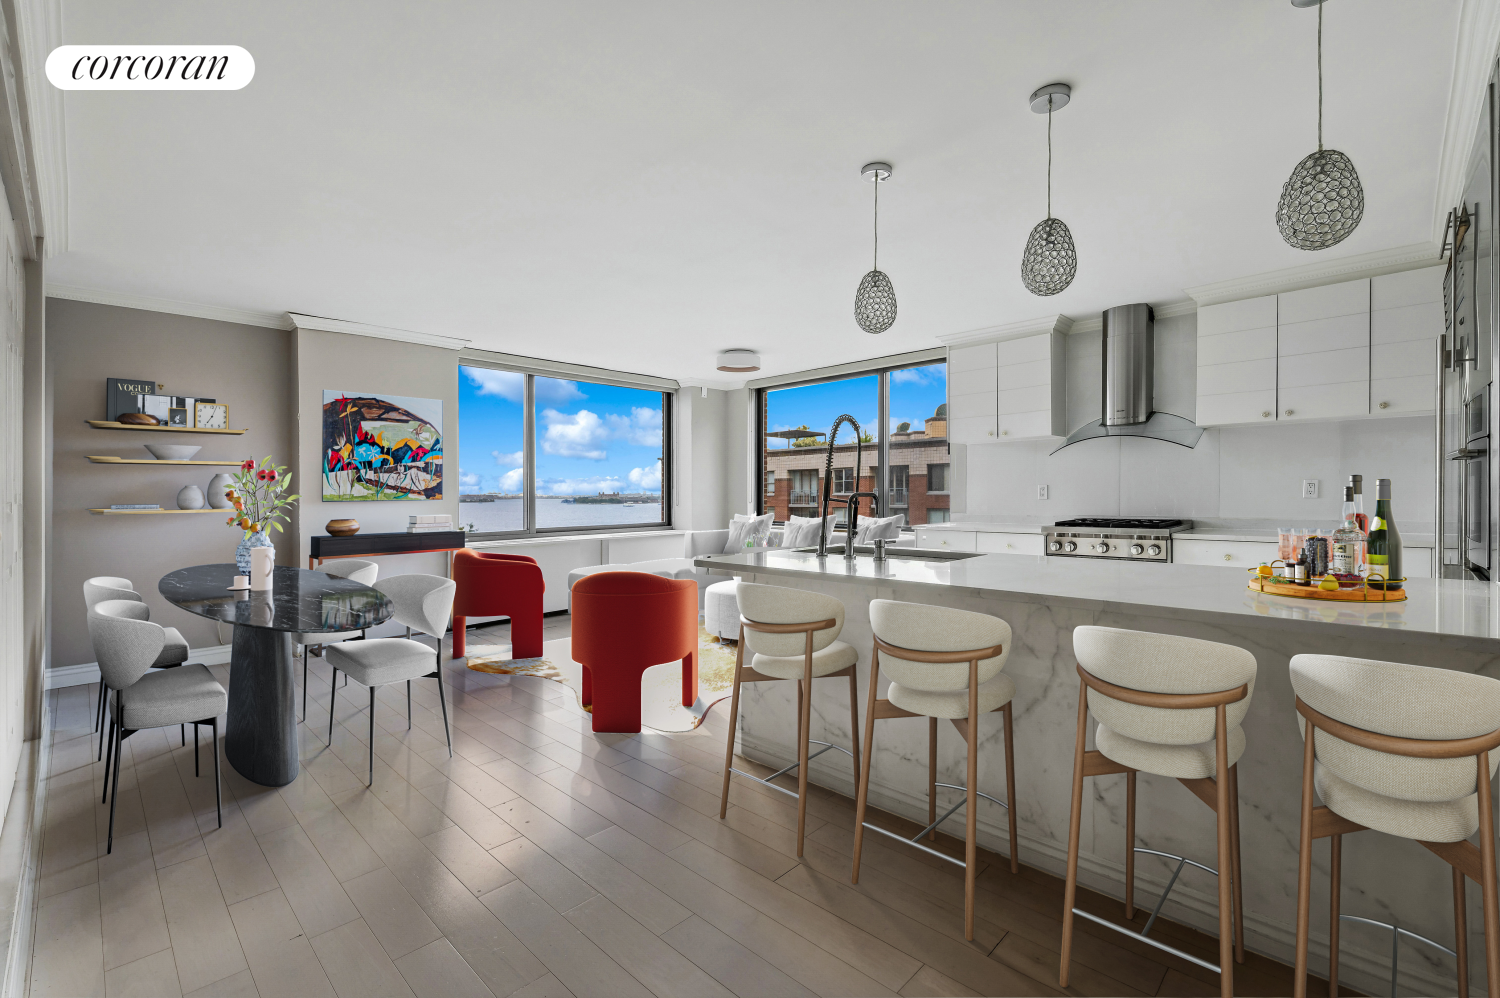 2 South End Avenue 9B, Battery Park City, Downtown, NYC - 3 Bedrooms  
2 Bathrooms  
5 Rooms - 